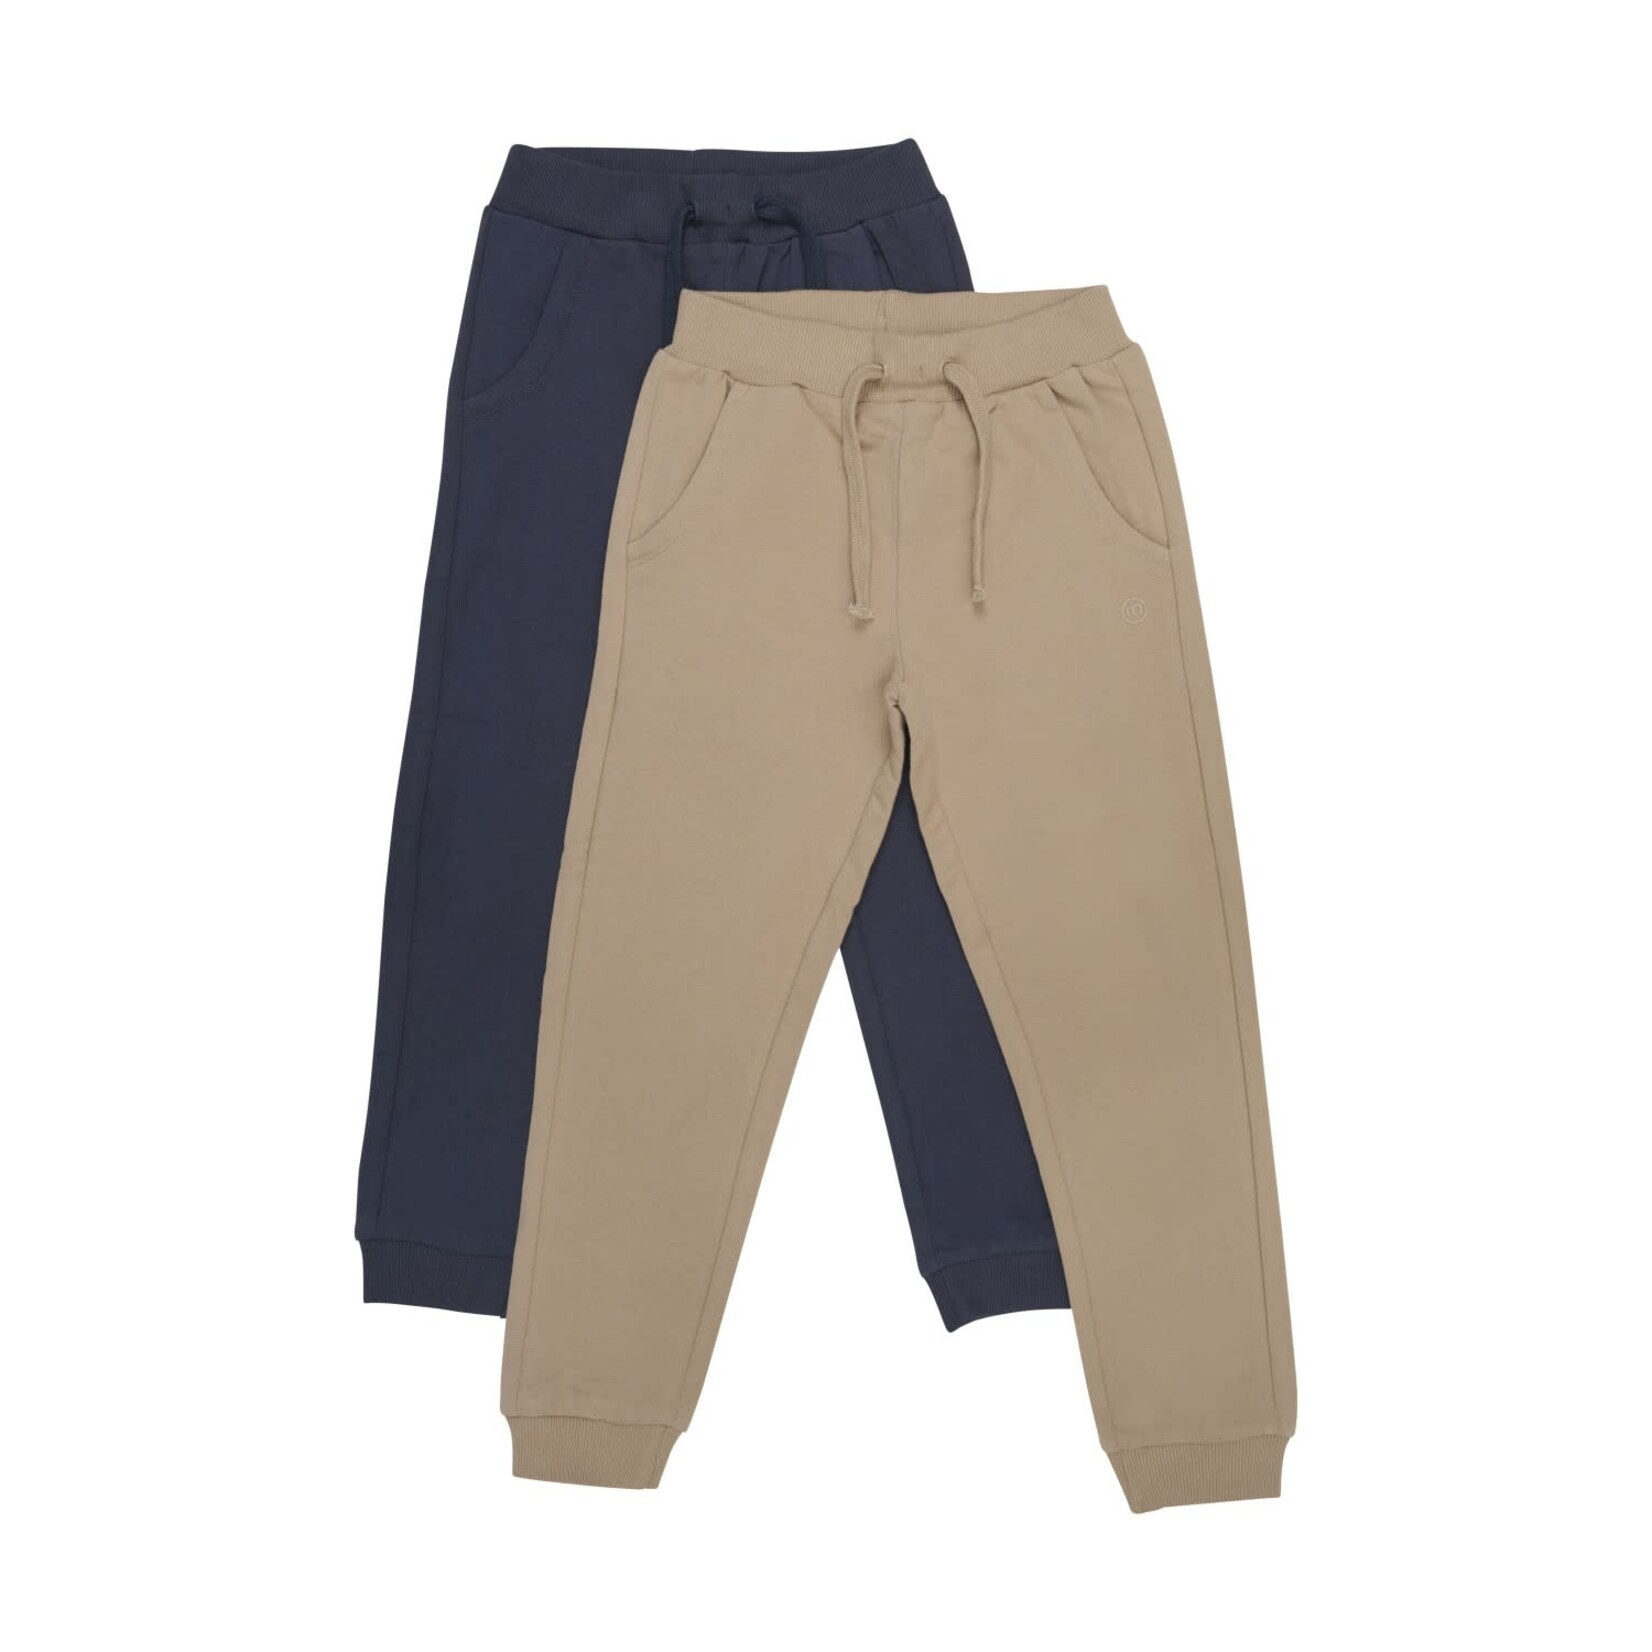 Minymo MINYMO - Set of 2 jogging pants in navy blue and beige brown organic cotton